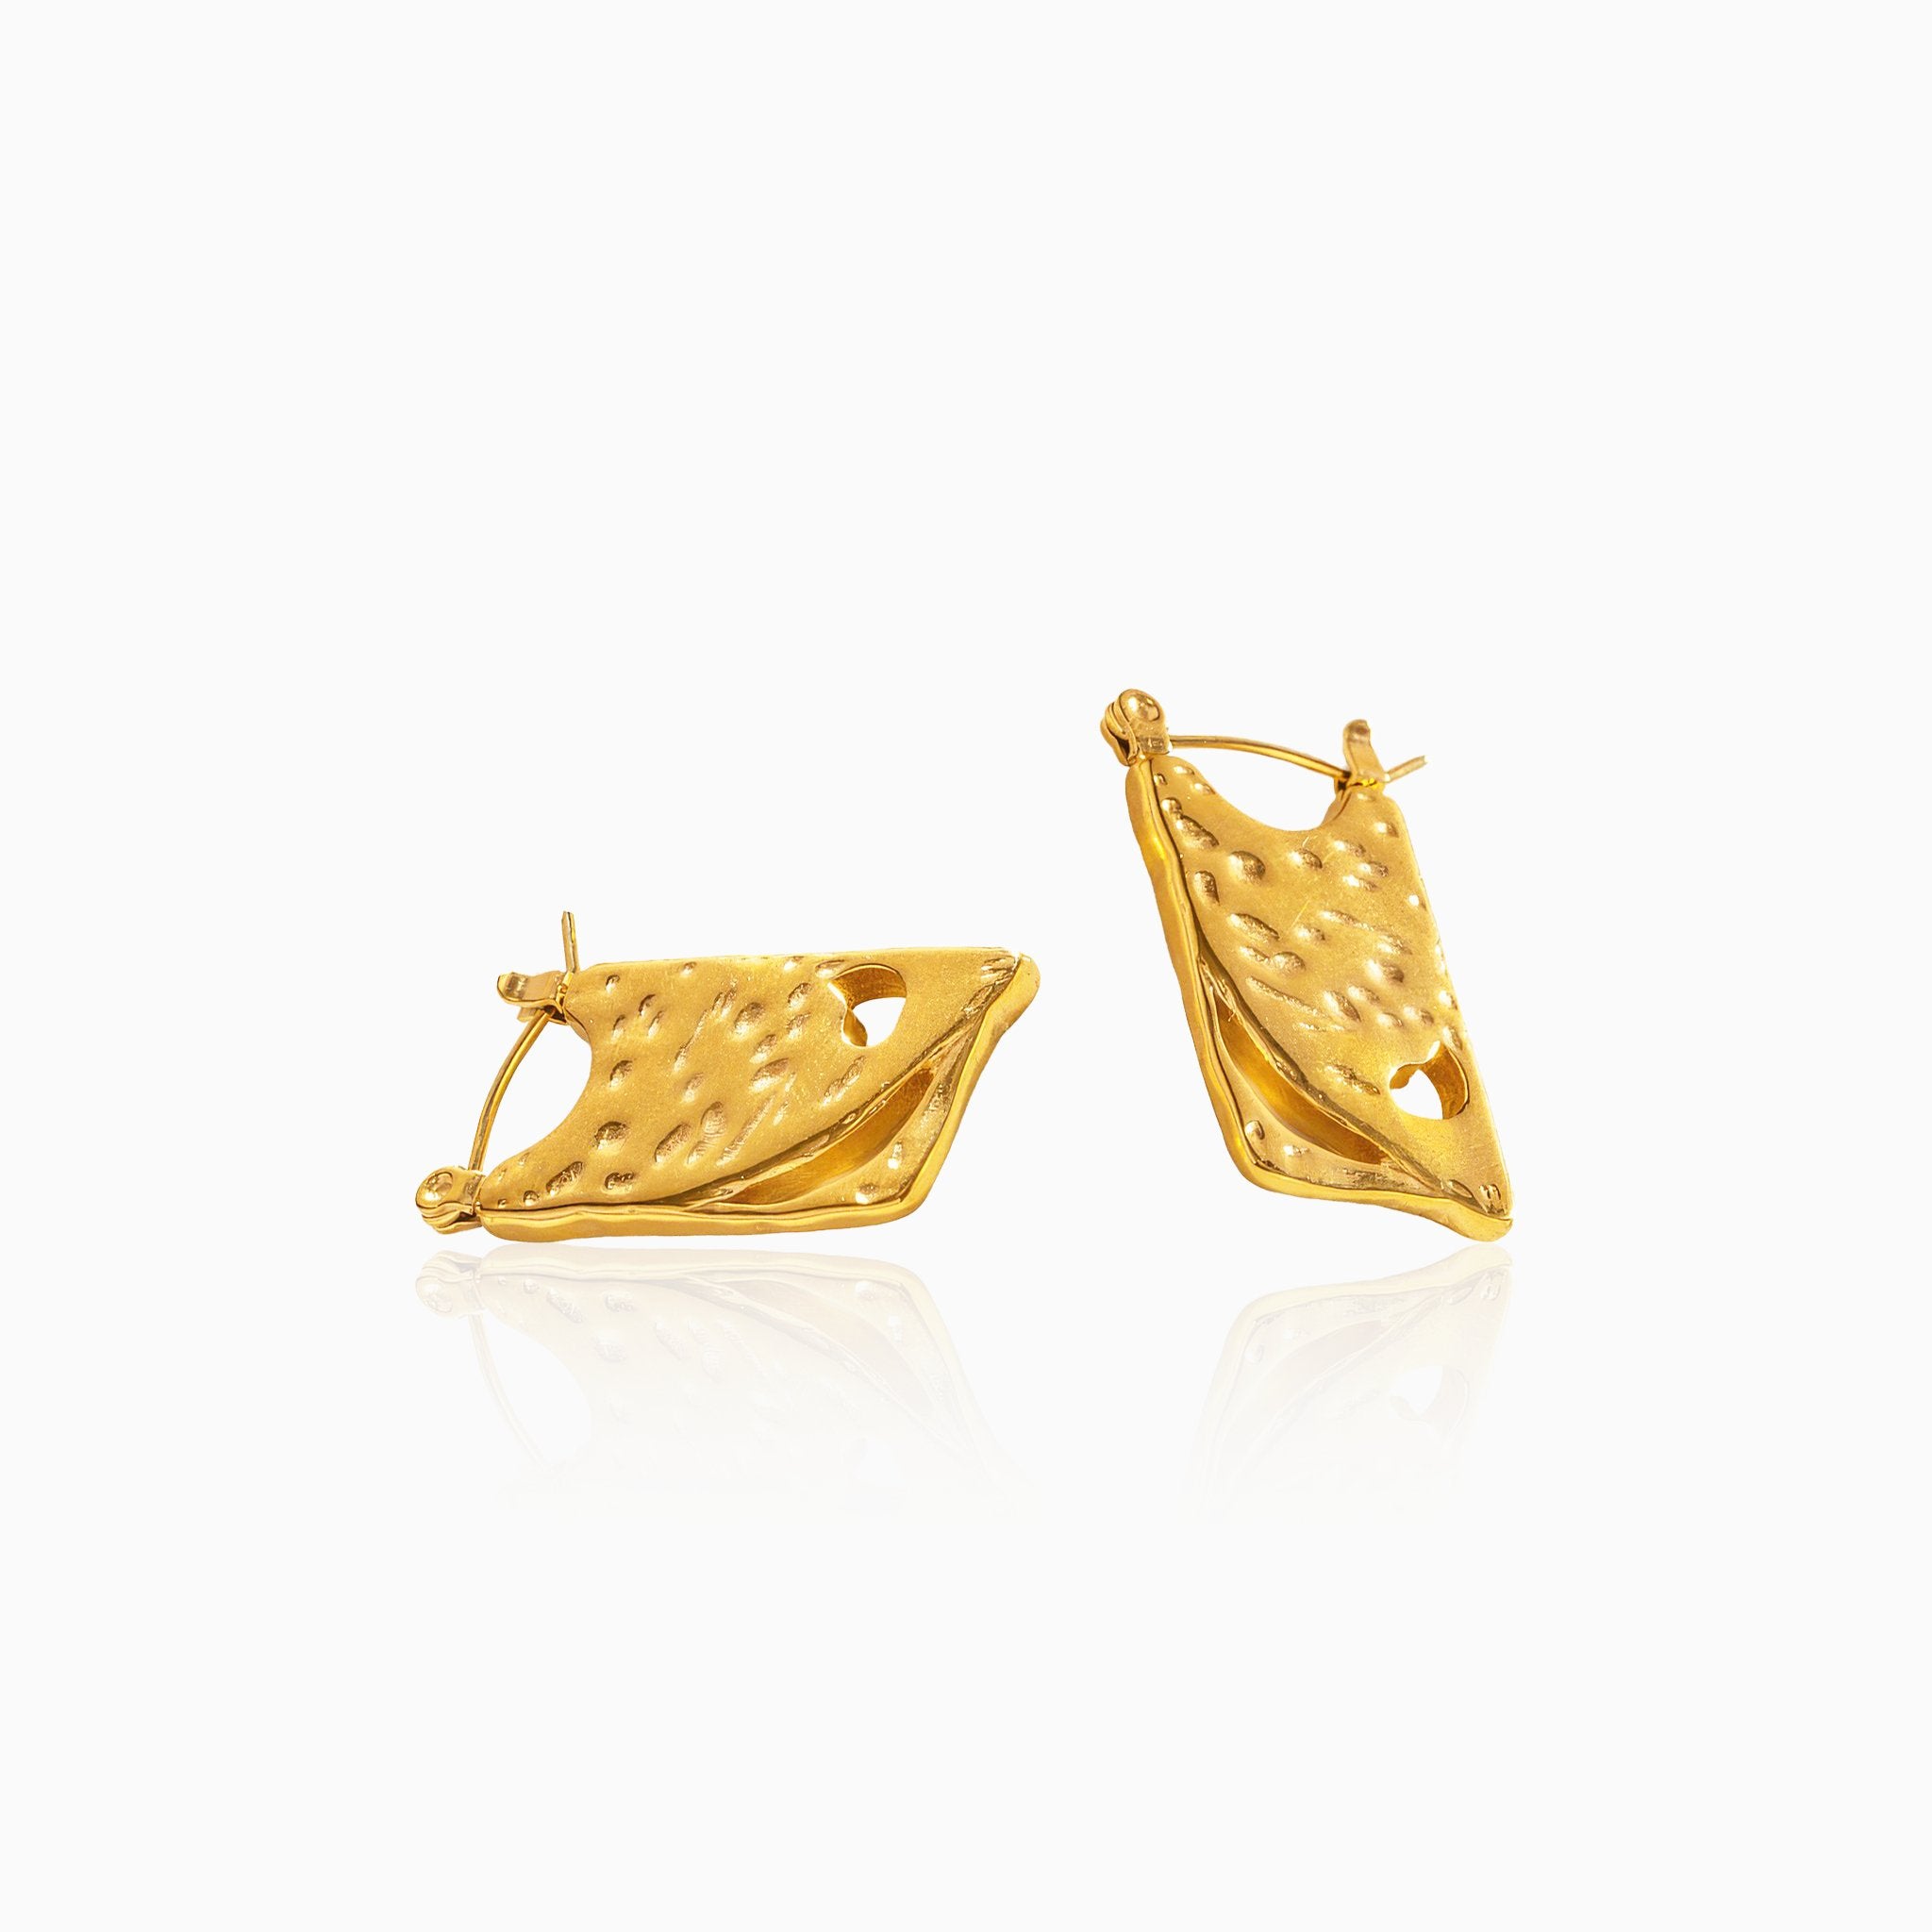 Cheese Grater Earrings - Nobbier - Earrings - 18K Gold And Titanium PVD Coated Jewelry